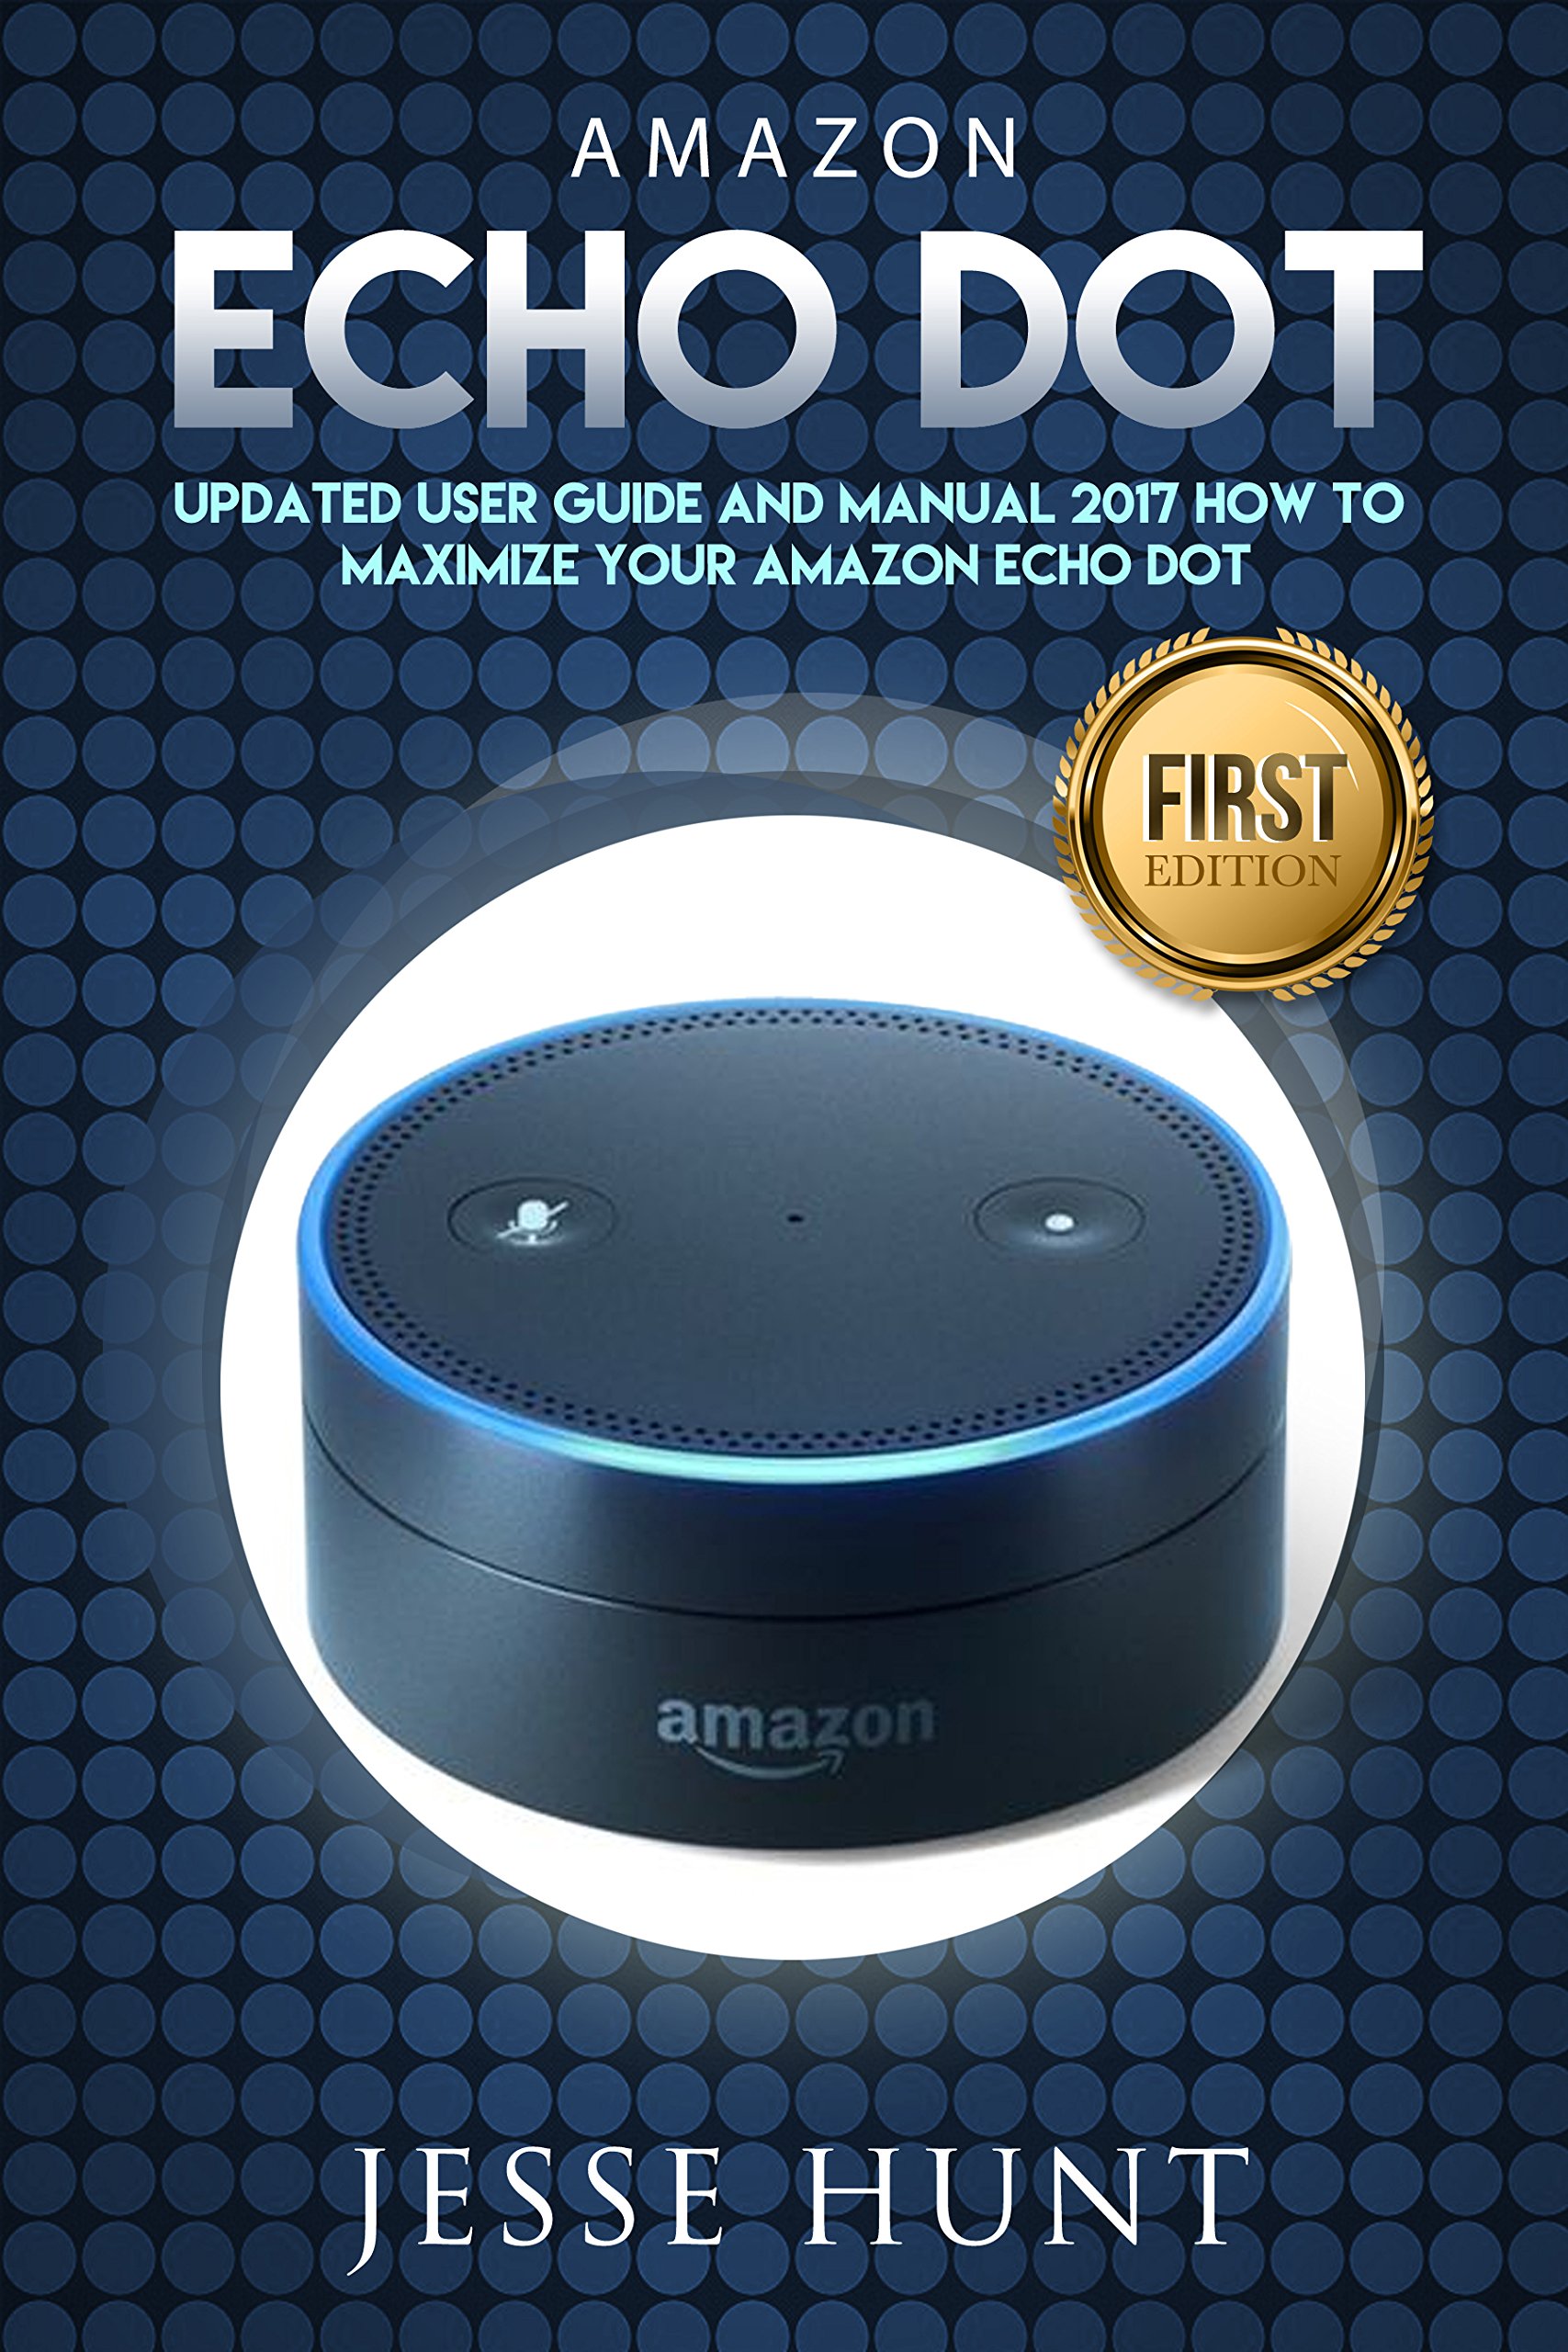 Amazon Echo Dot: Updated User Guide and Manual 2017 How to Maximize your Amazon Echo Dot (Amazon Dot, Amazon Echo, Amazon Alexa, Amazon Tap, Amazon Fire Stick, Amazon Fire Tablet, Amazon Speaker)